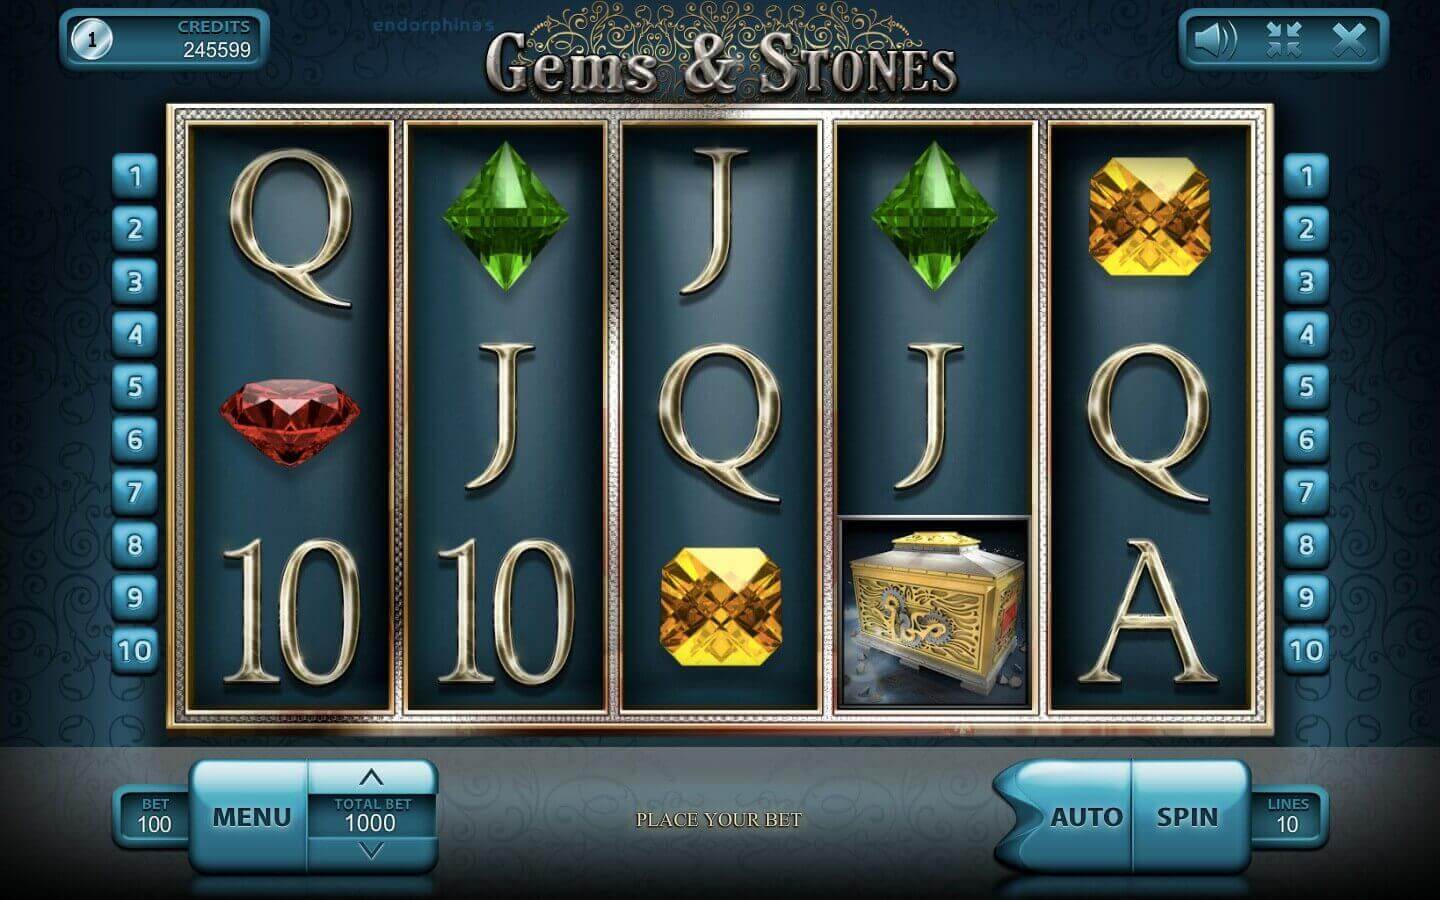 Gems and Stones Spel proces